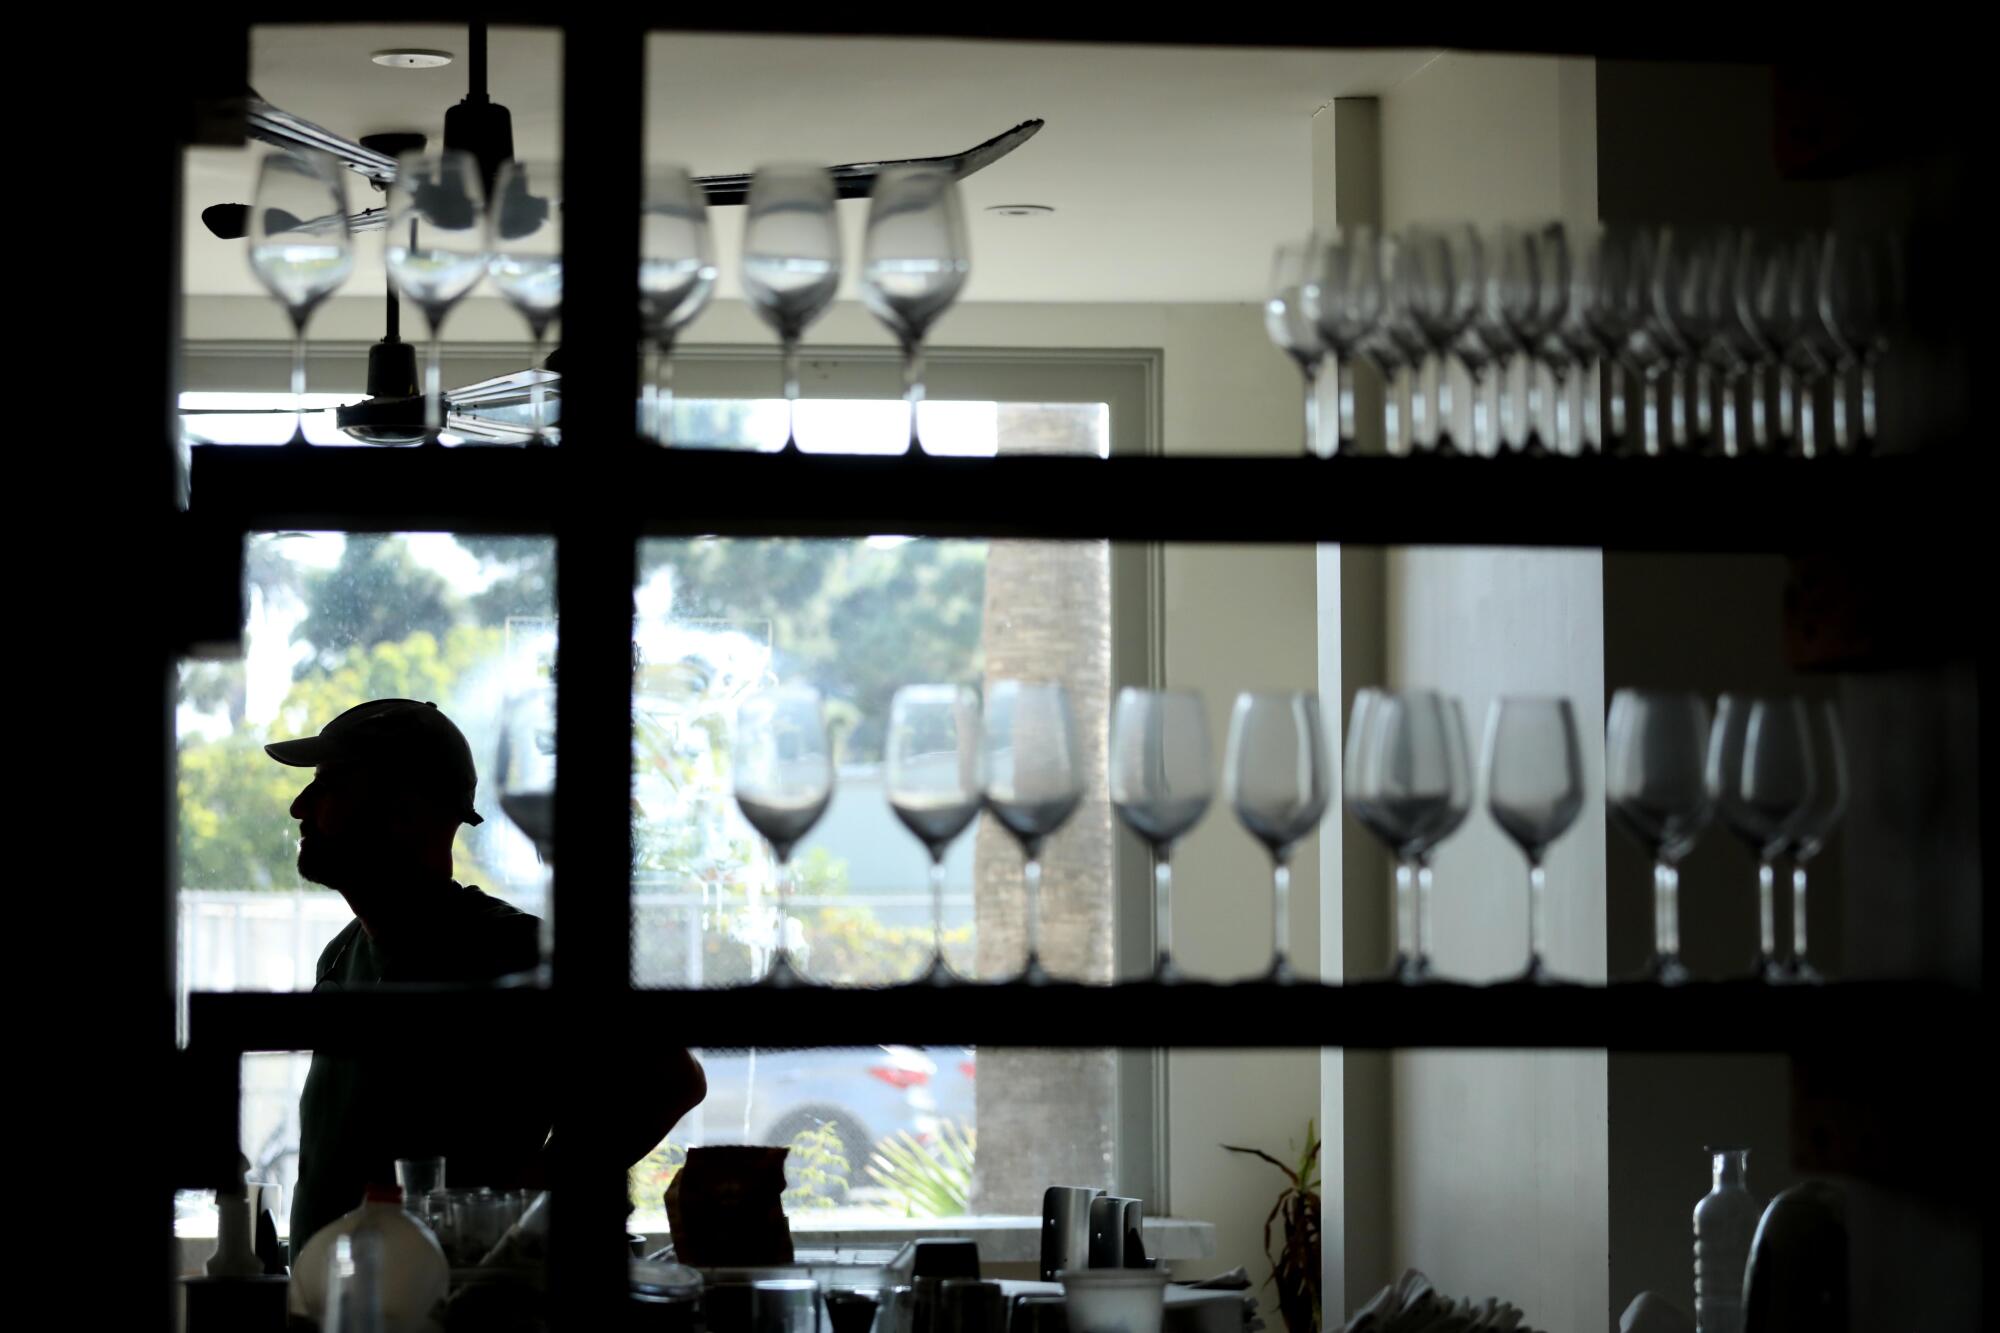 A person in silhouette behind a shelf of wine glasses.